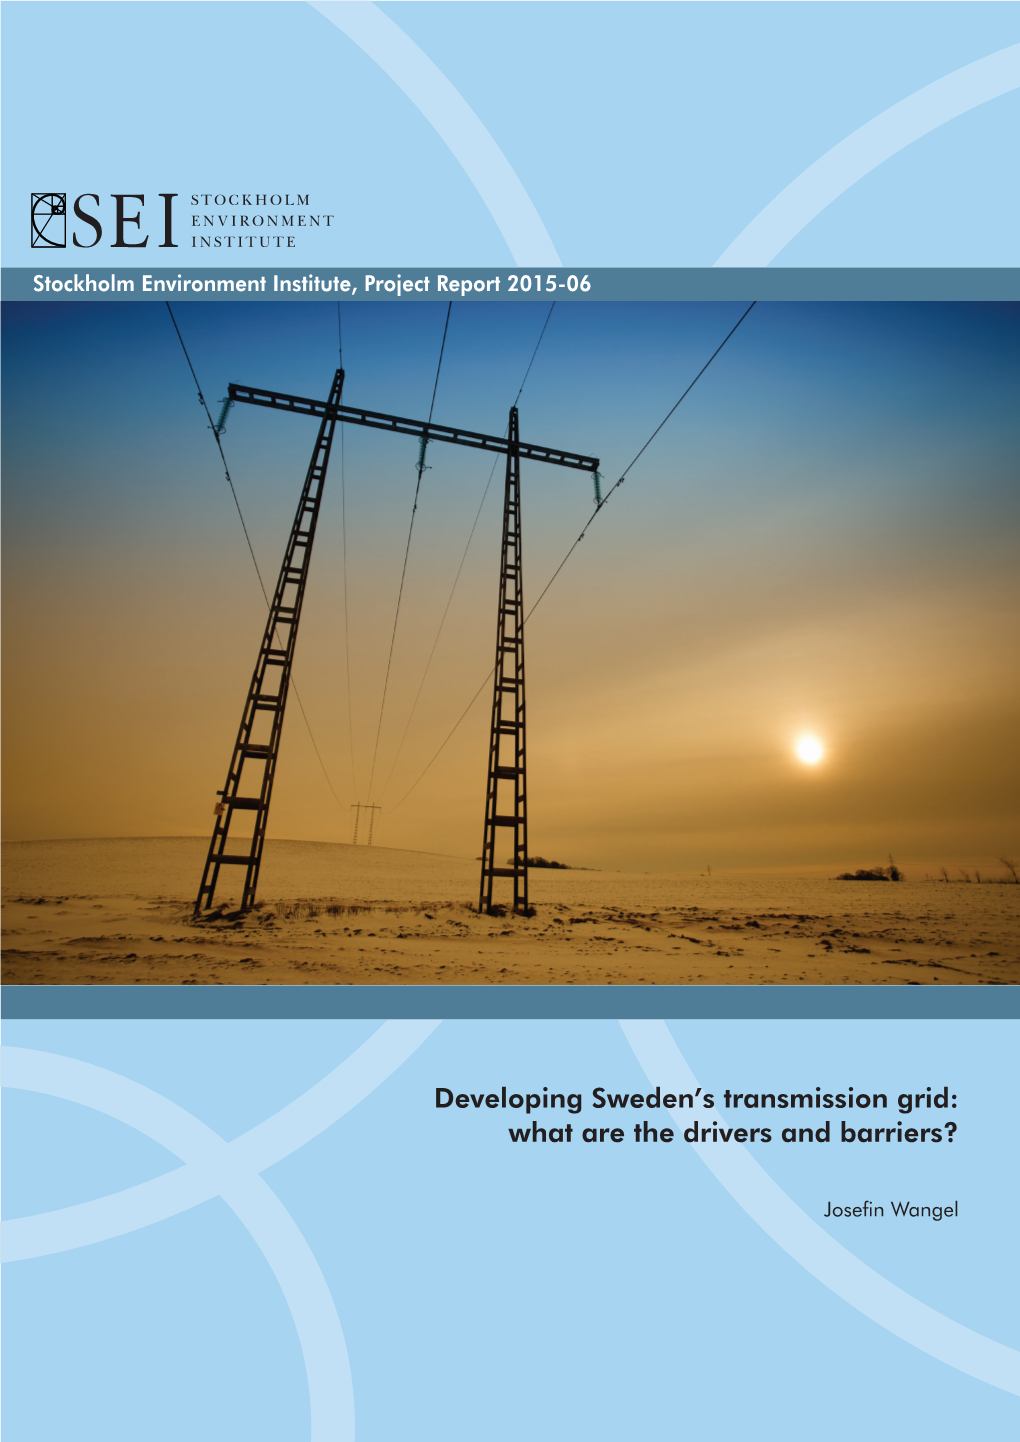 Developing Sweden's Transmission Grid: What Are the Drivers And